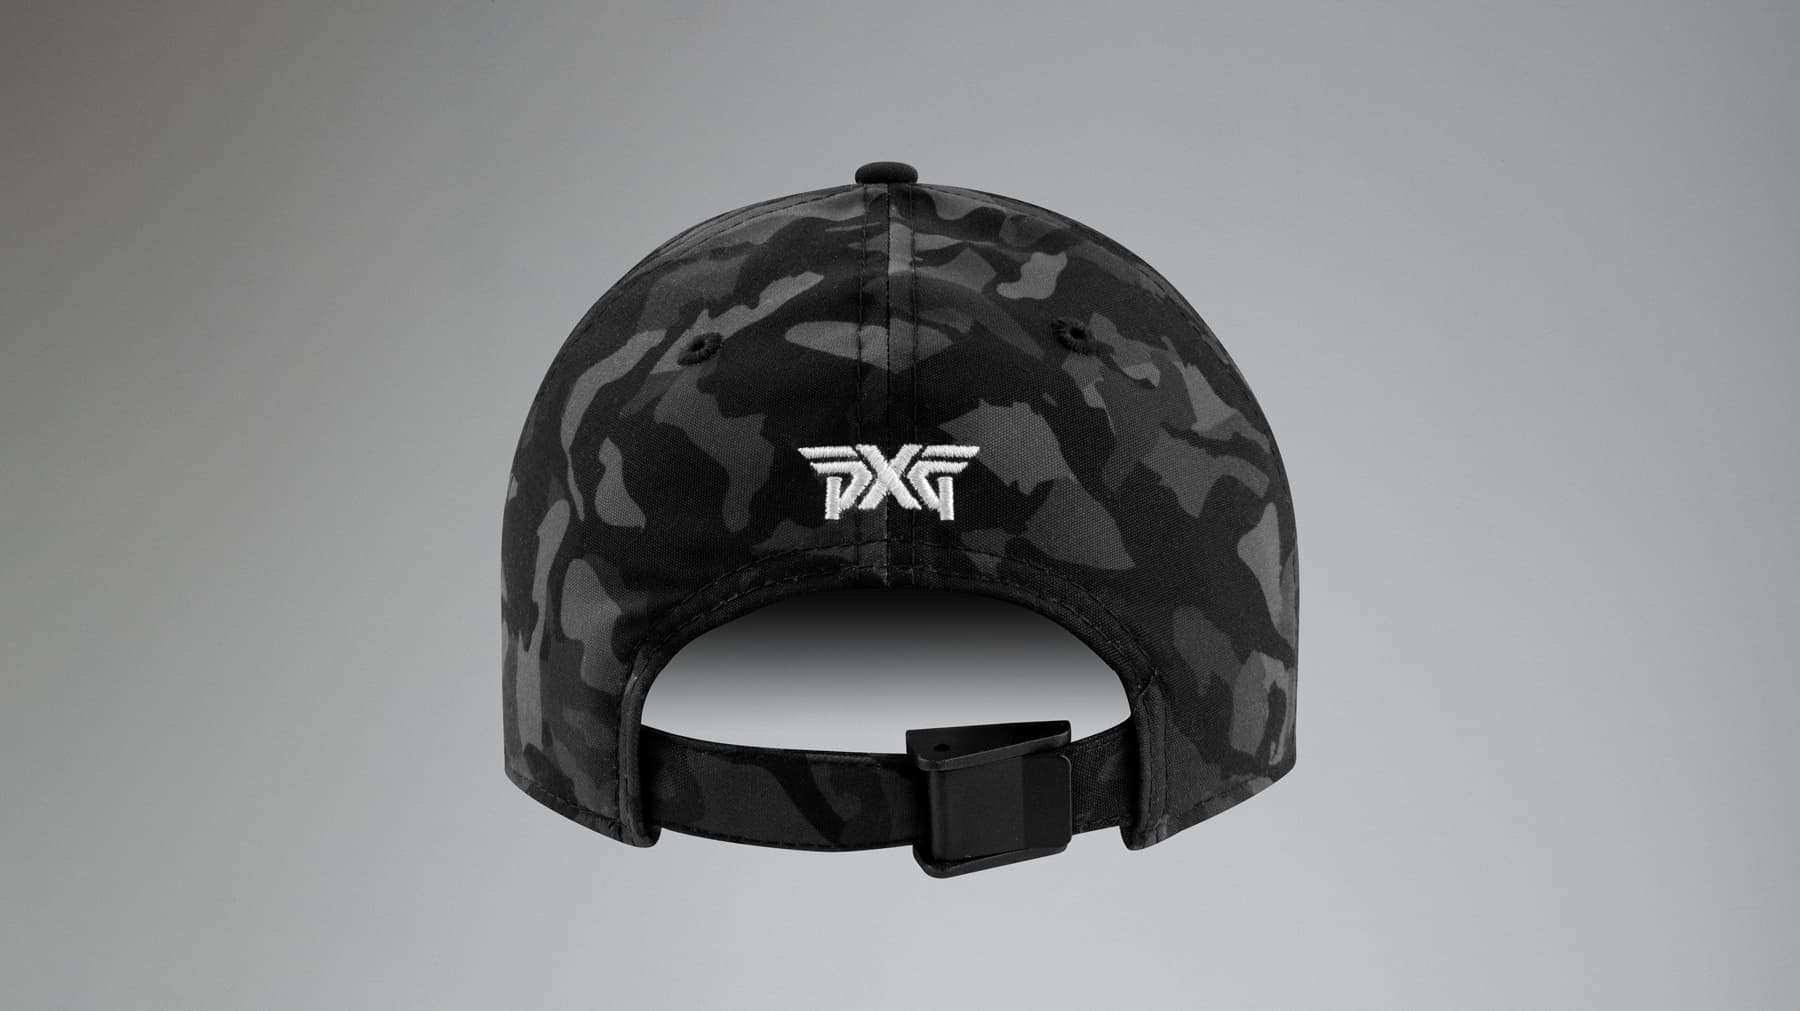 Fairway Camo Jogger  Shop the Highest Quality Golf Apparel, Gear,  Accessories and Golf Clubs at PXG